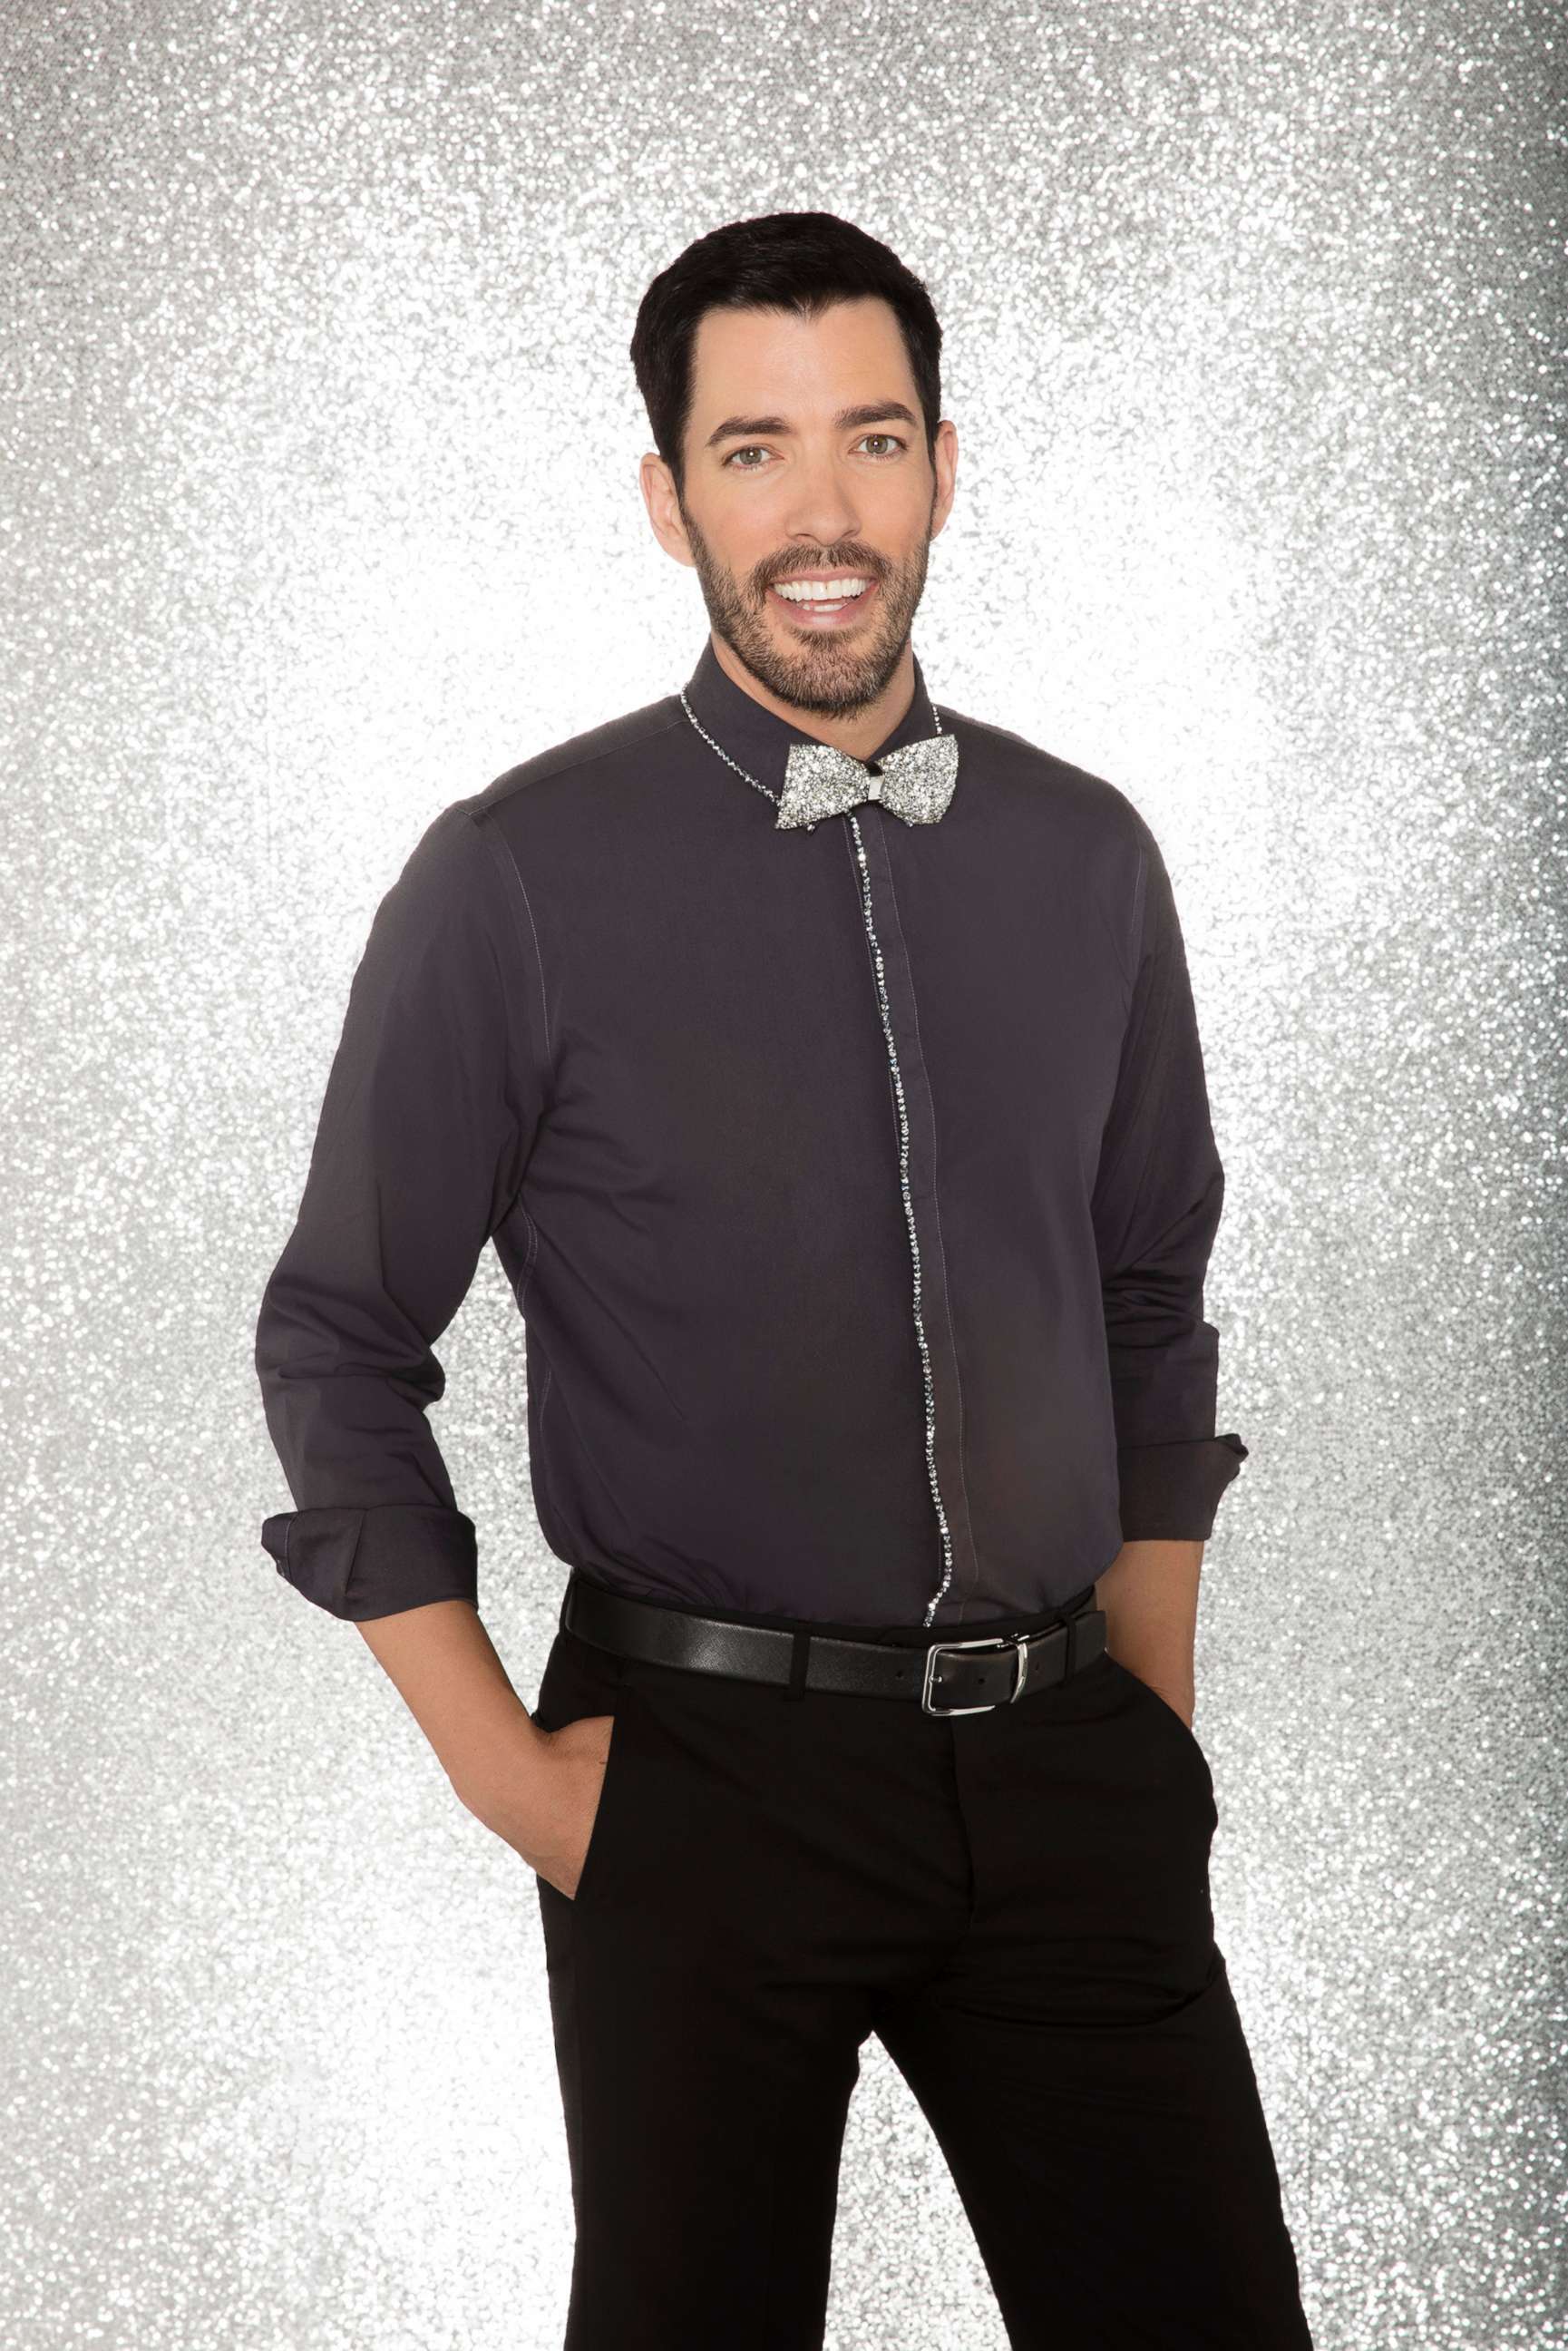 PHOTO: Drew Scott will compete for the mirror ball title on the new season "Dancing With The Stars."